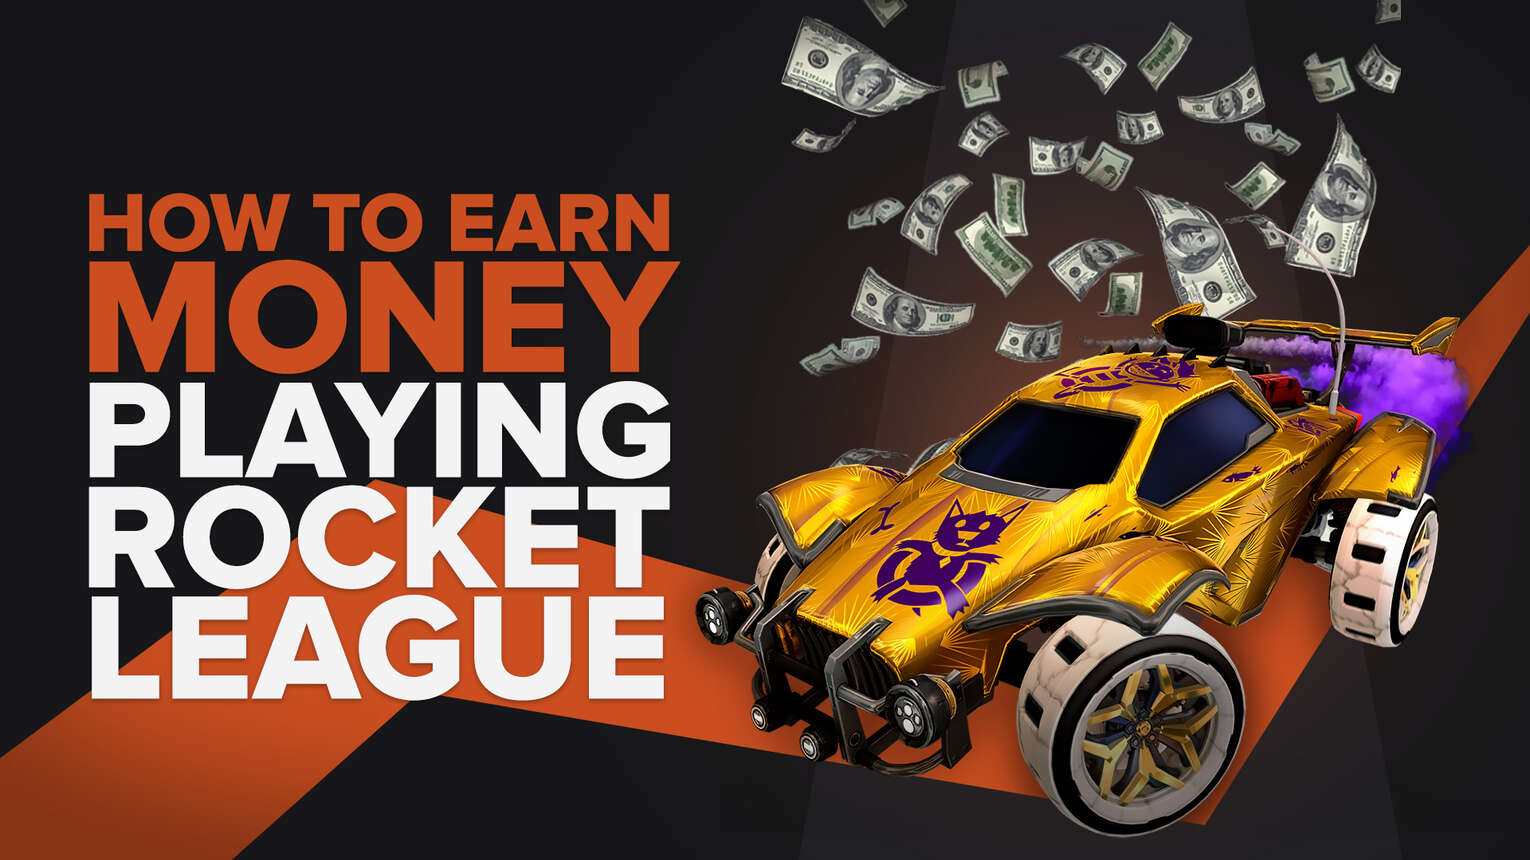 How To Earn Money Playing Rocket League (3 Working Ways)